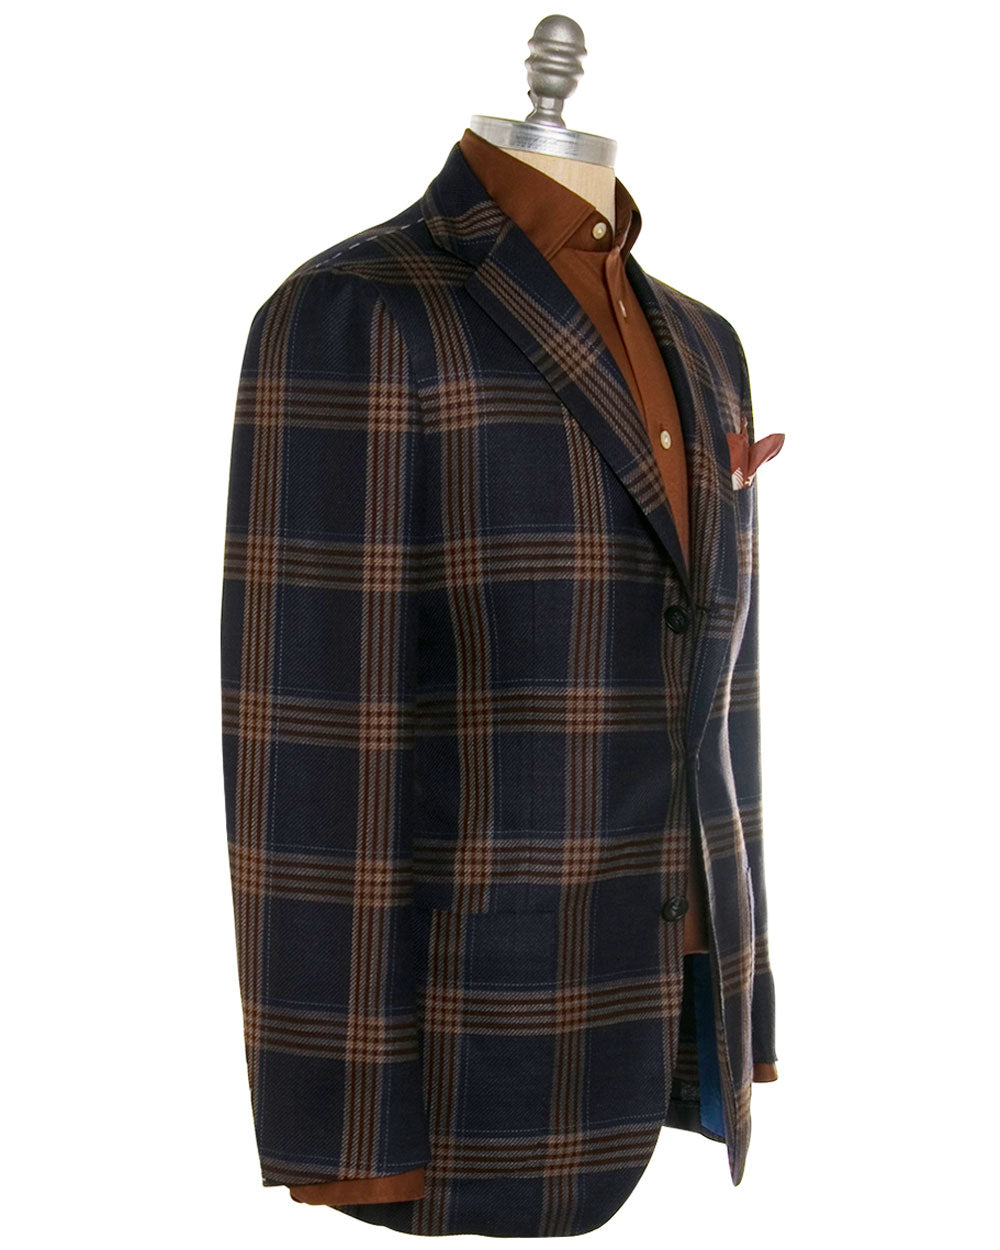 Navy and Rust Plaid Sportcoat